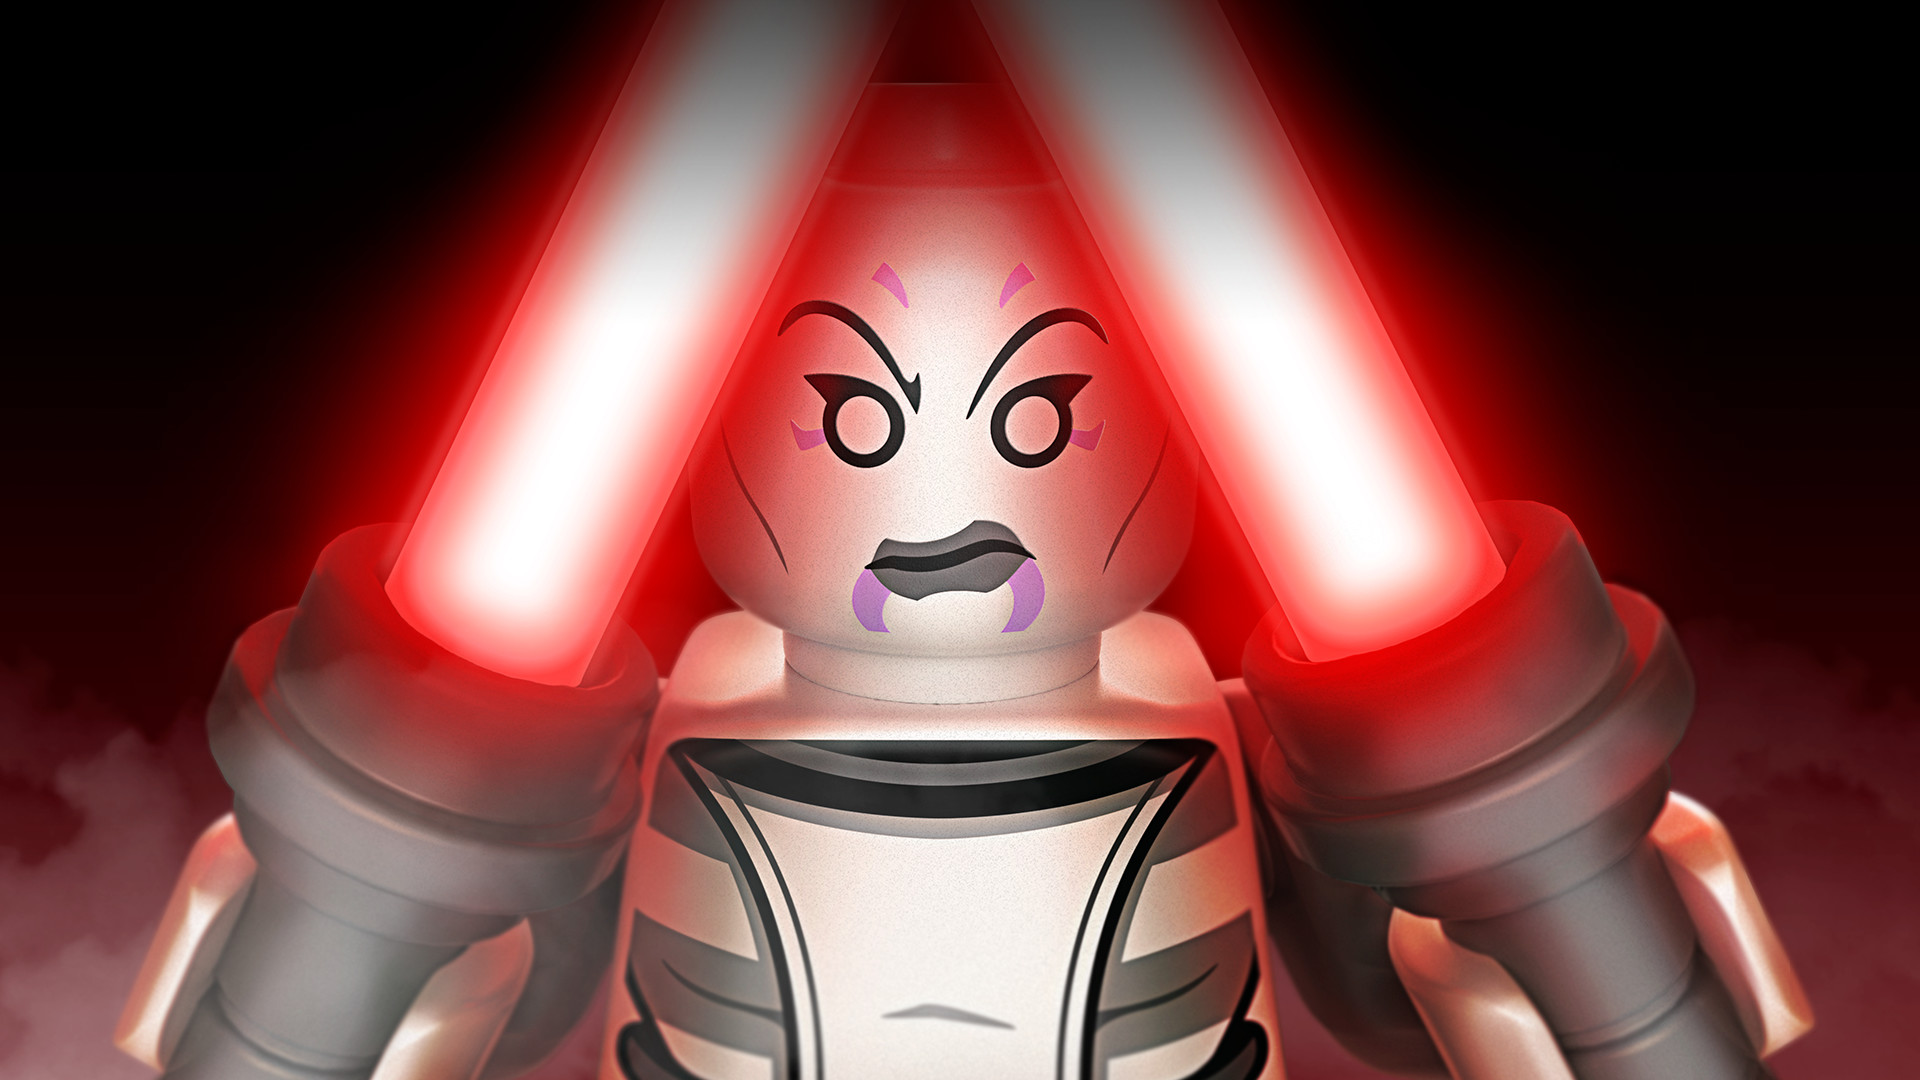 LEGO Star Wars: The Force Awakens - The Clone Wars Character Pack DLC Steam CD Key 1.68$